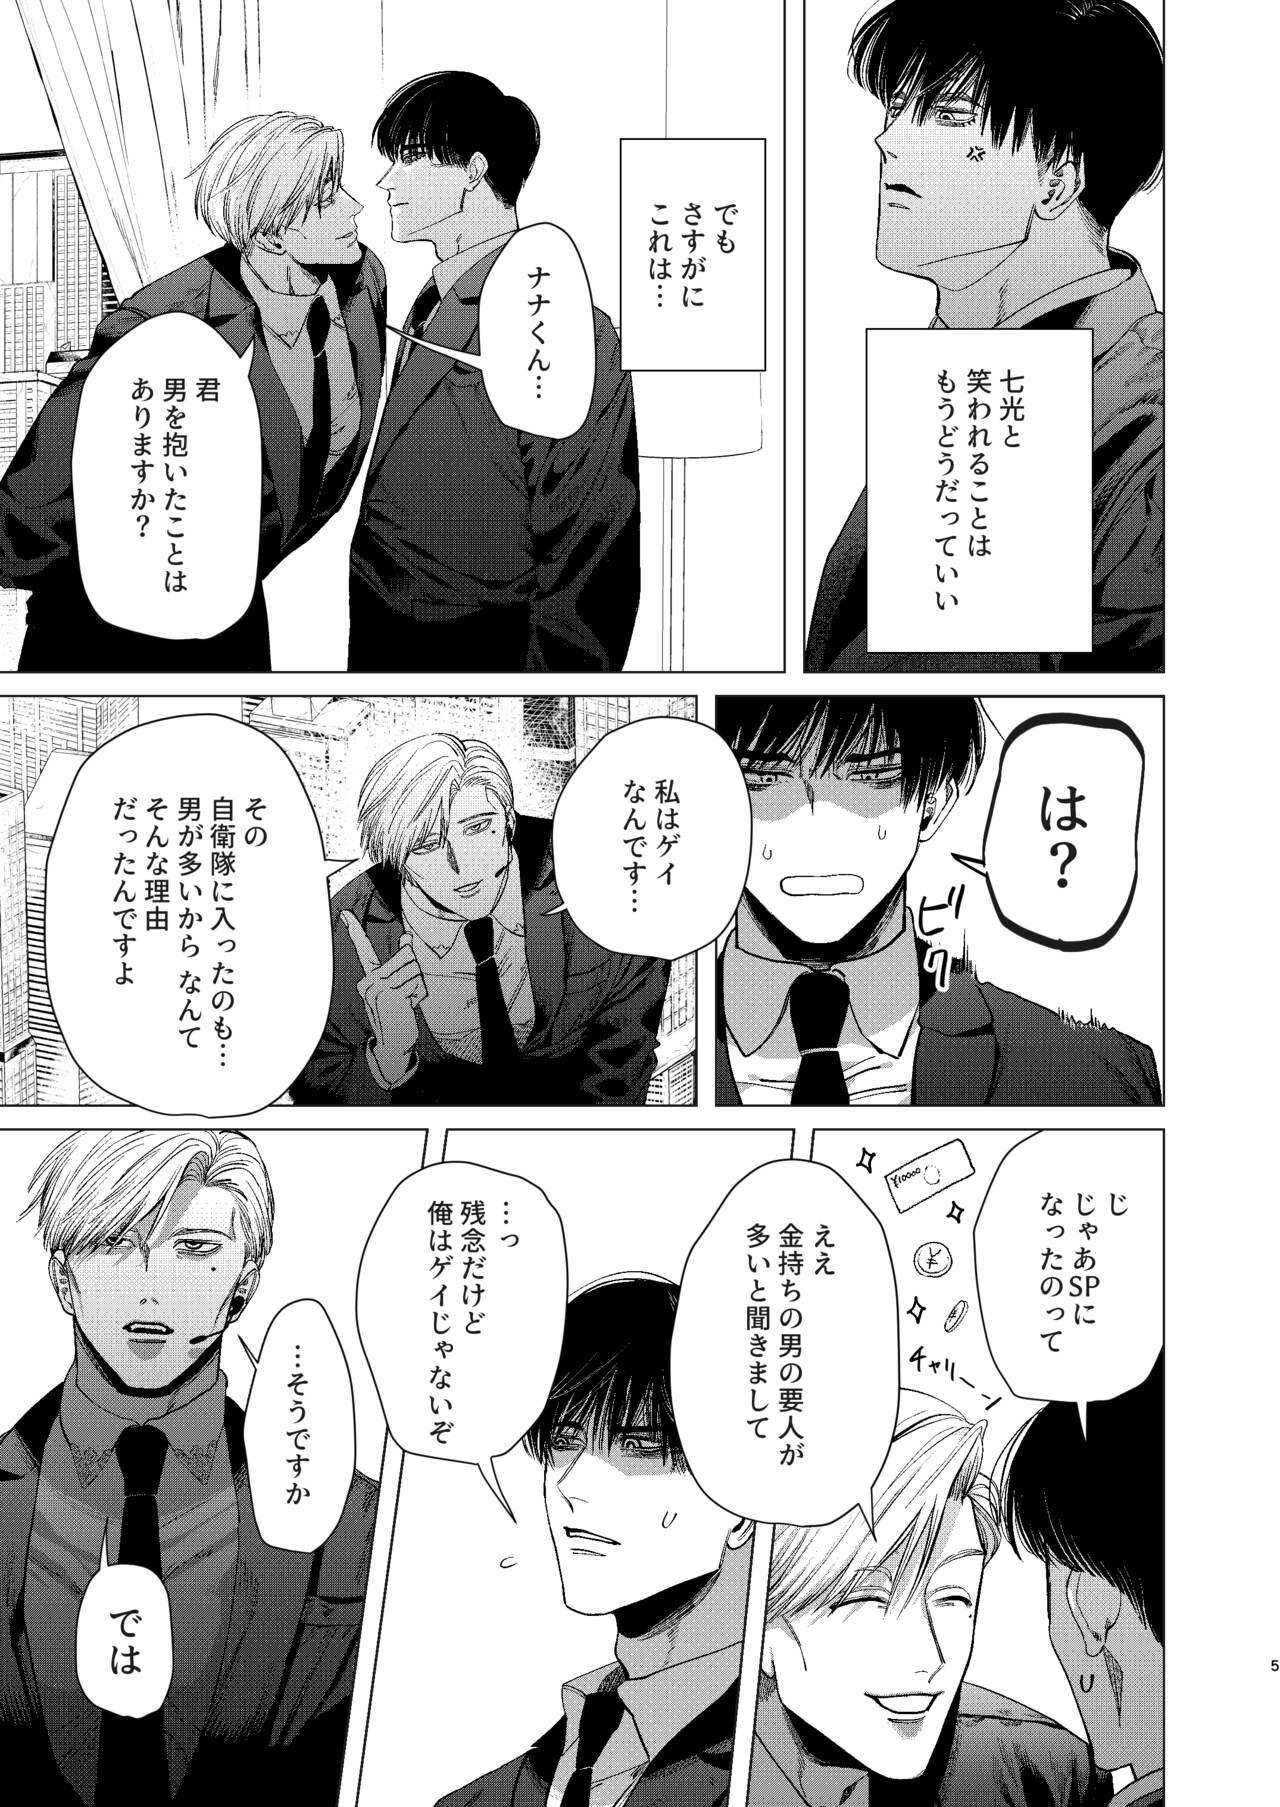 Pigtails Ore o Mamoru no wa Kinpatsu Gachimuchi Inran SP?! | The One Who Protects Me is the Blond Hairy Horny SP?! - Original Cousin - Page 4